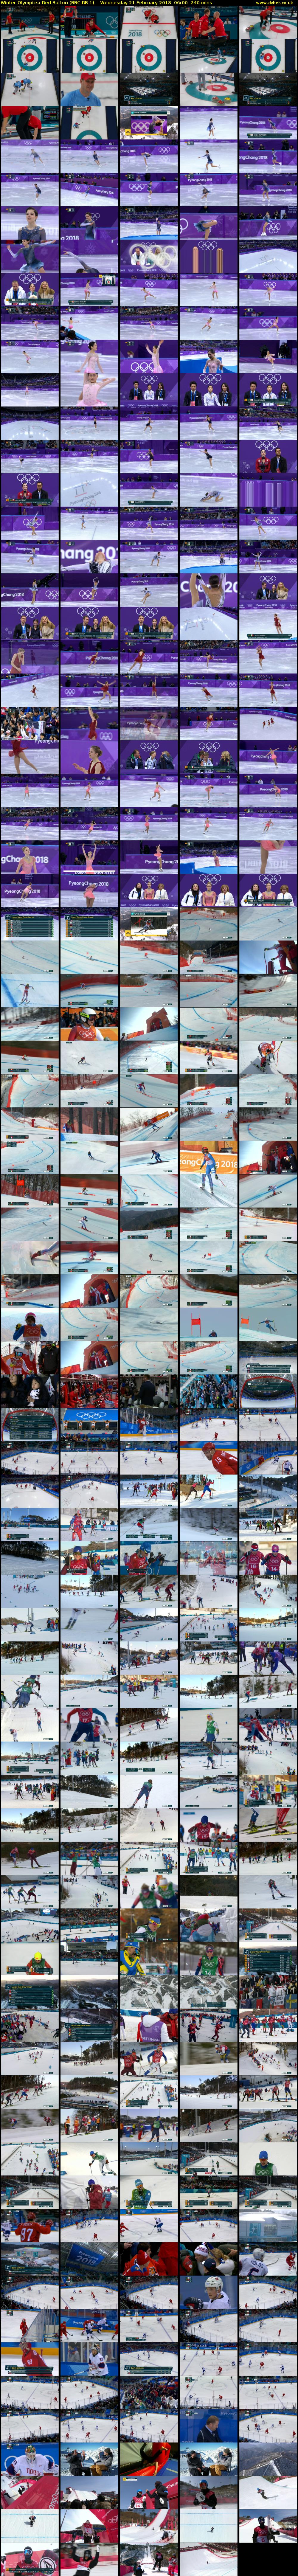 Winter Olympics: Red Button (BBC RB 1) Wednesday 21 February 2018 06:00 - 10:00